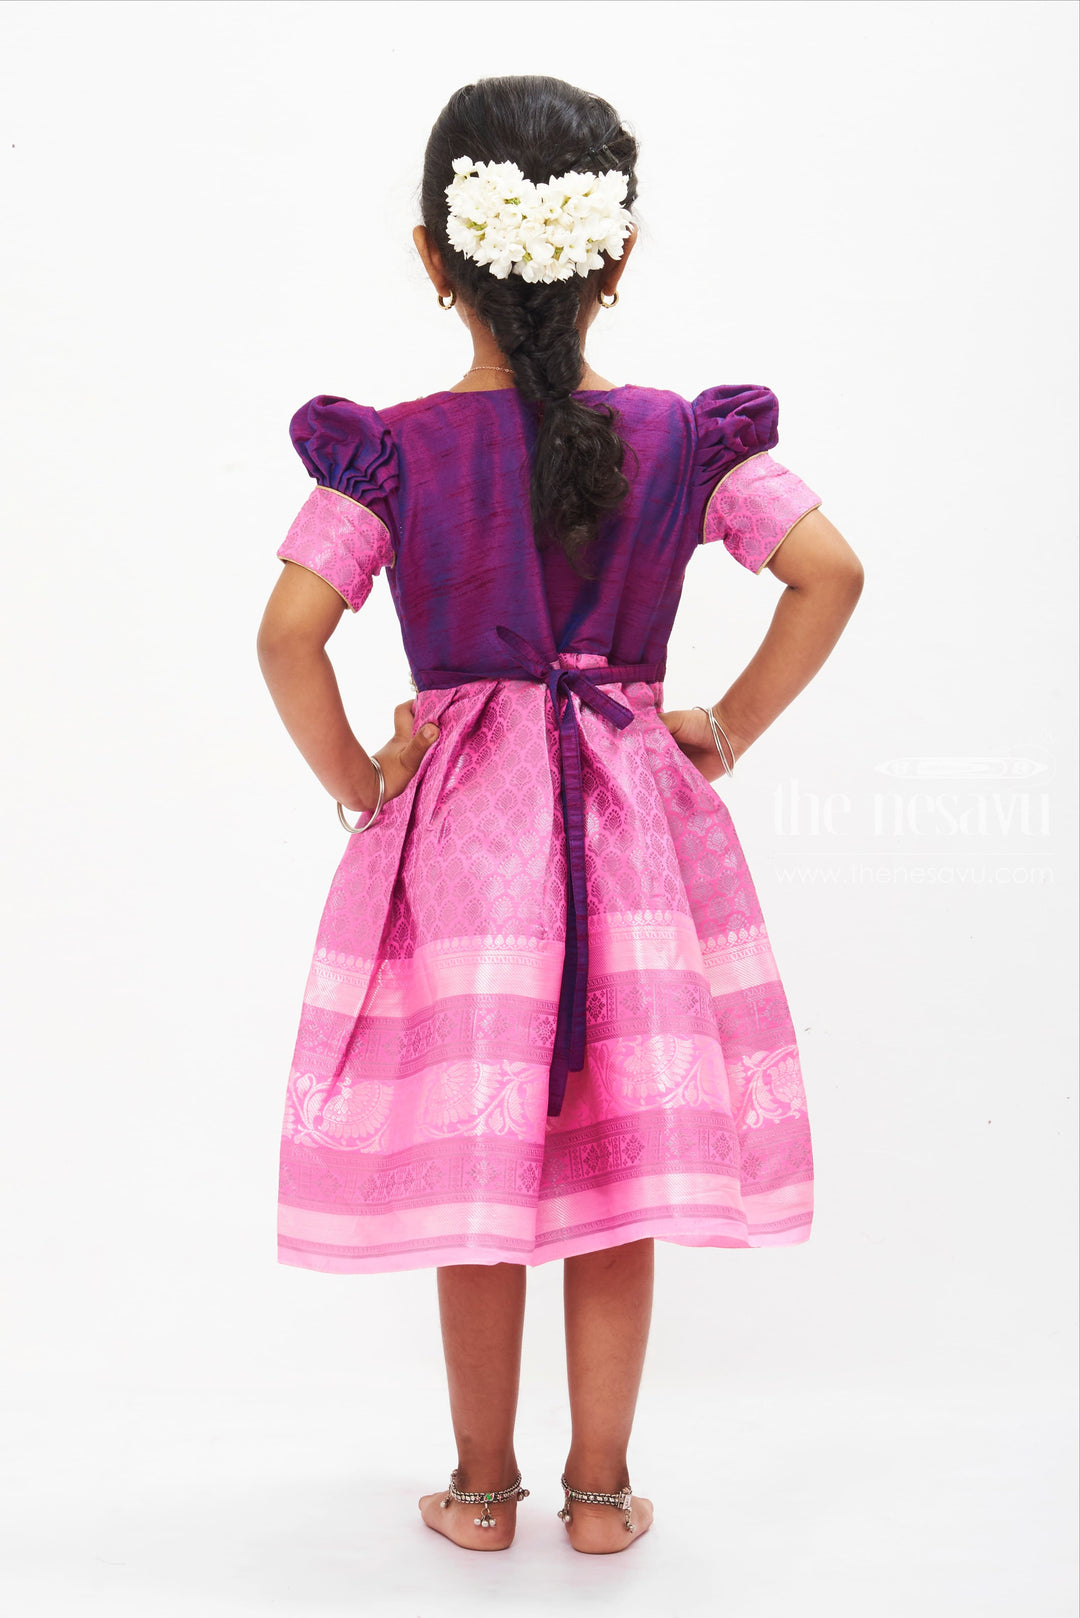 The Nesavu Silk Frock Majestic Purple & Pink Dress: Traditional Indian Wear with Modern Flair for Girls Nesavu Girls Traditional Dress | Elegant Indian Silk Frock for Kids | The Nesavu